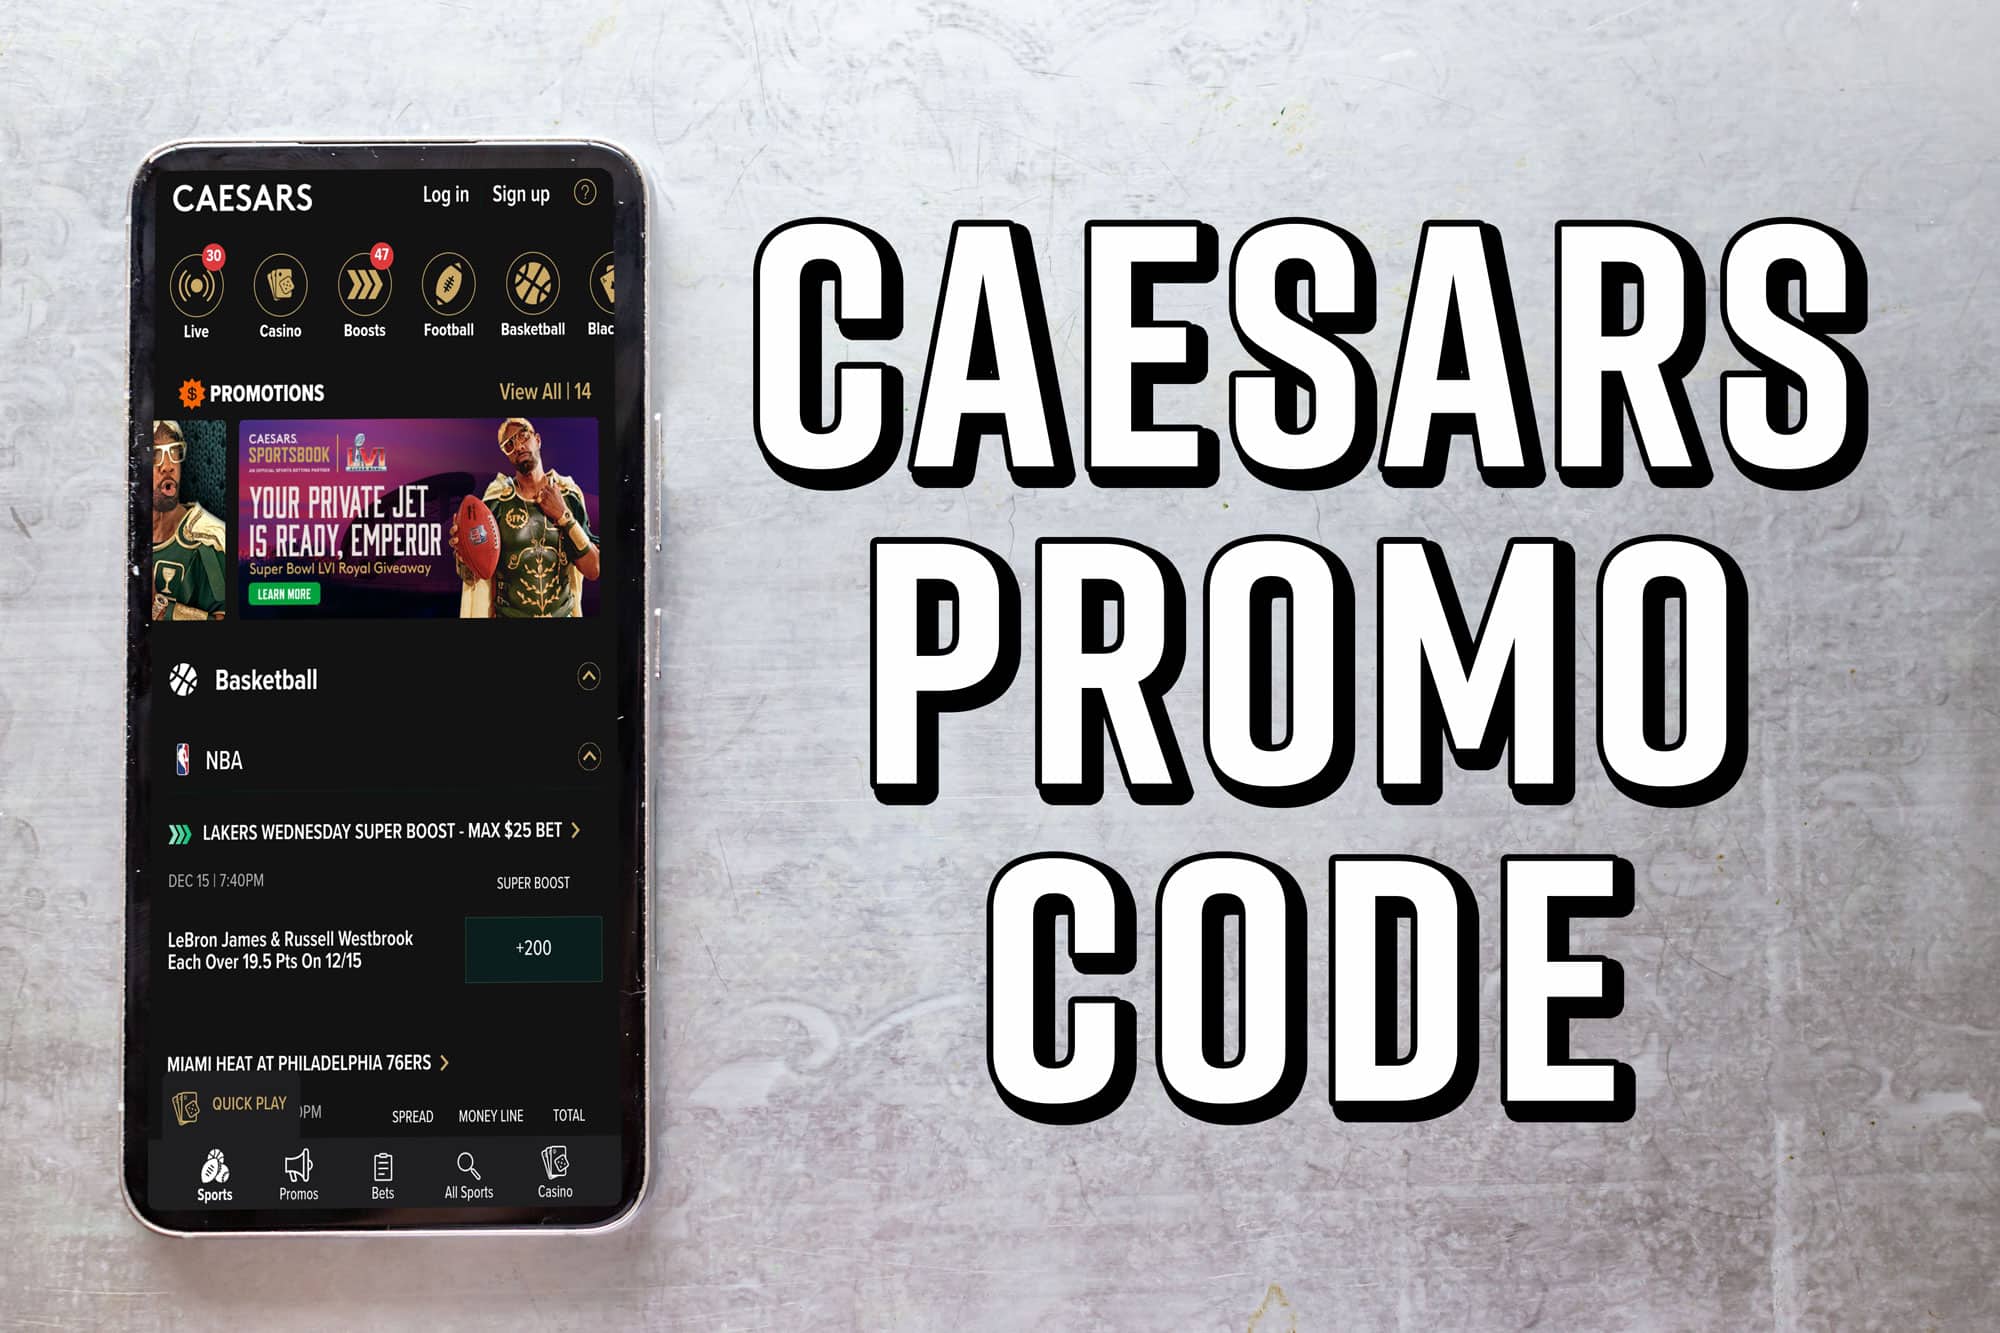 Caesars Promo Code: $1,250 for Top College Football Games, World Series Game 6